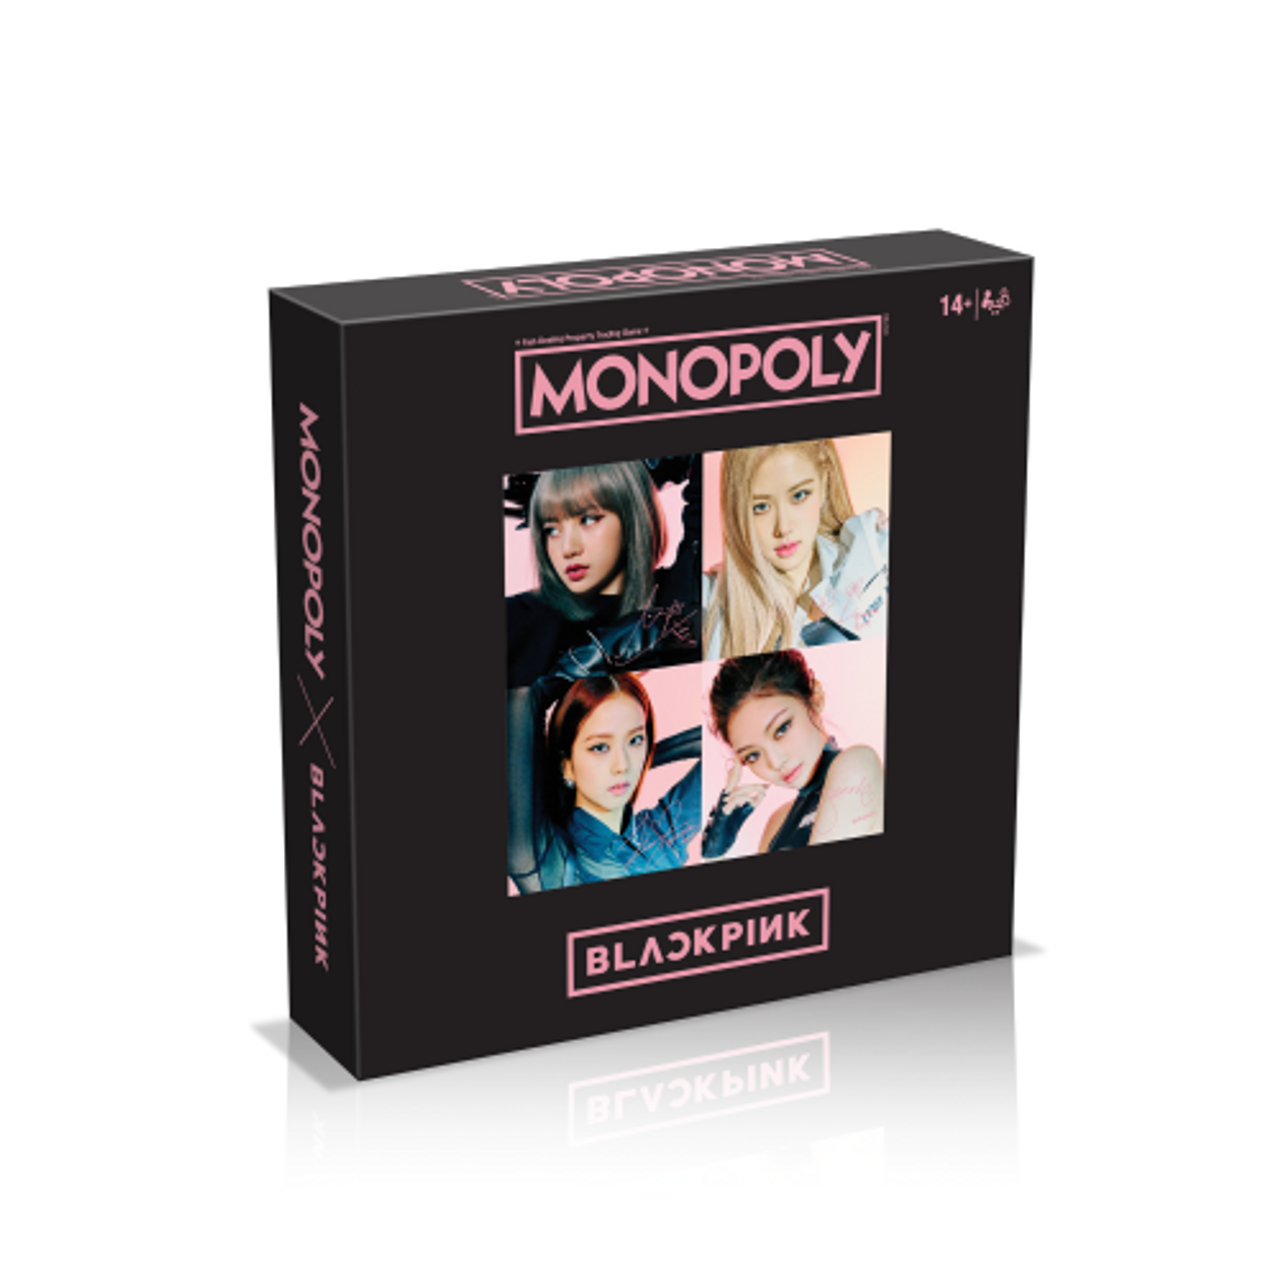 BLACKPINK  IN YOUR AREA MONOPOLY